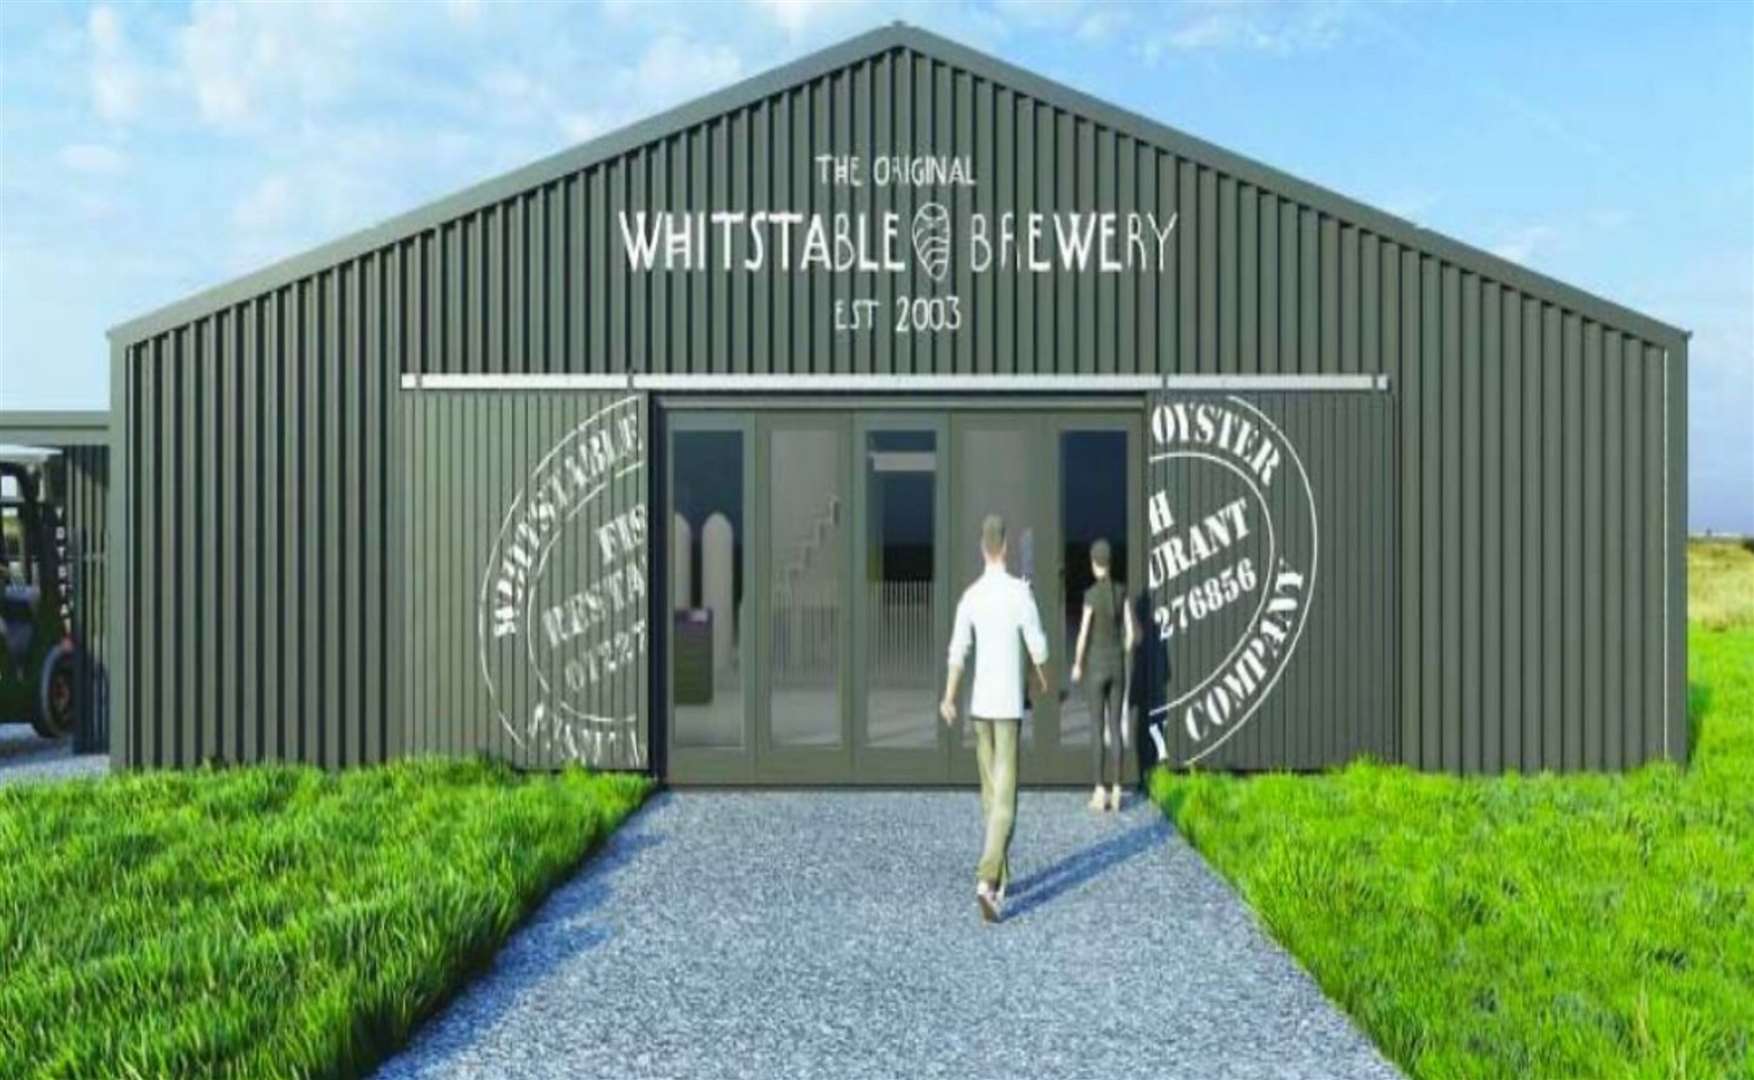 A CGI showing how the brewery was expected to look